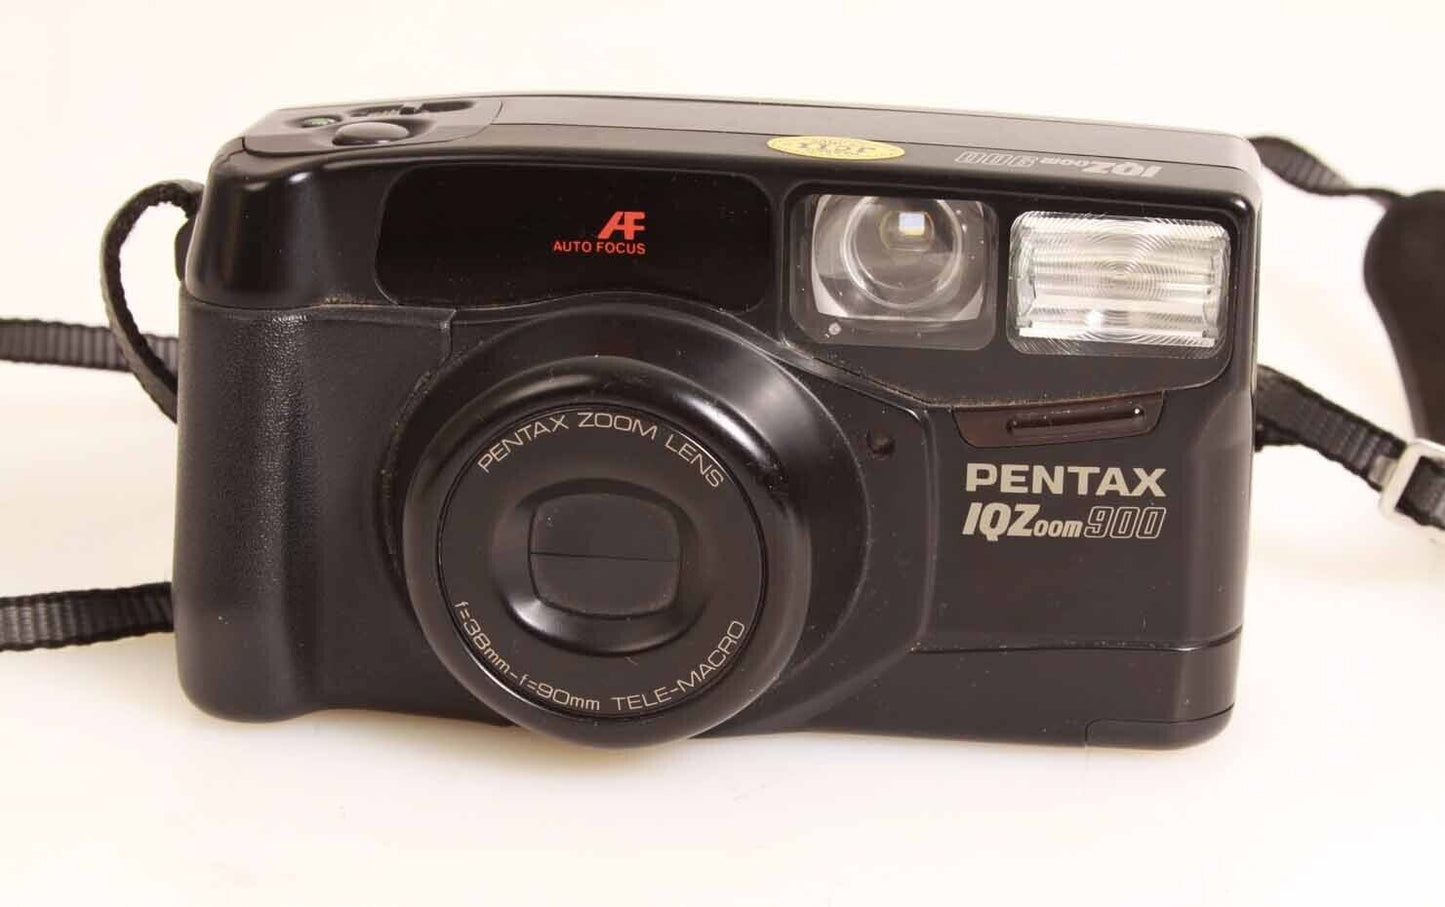 PENTAX IQZOOM 900 35mm POINT & SHOOT